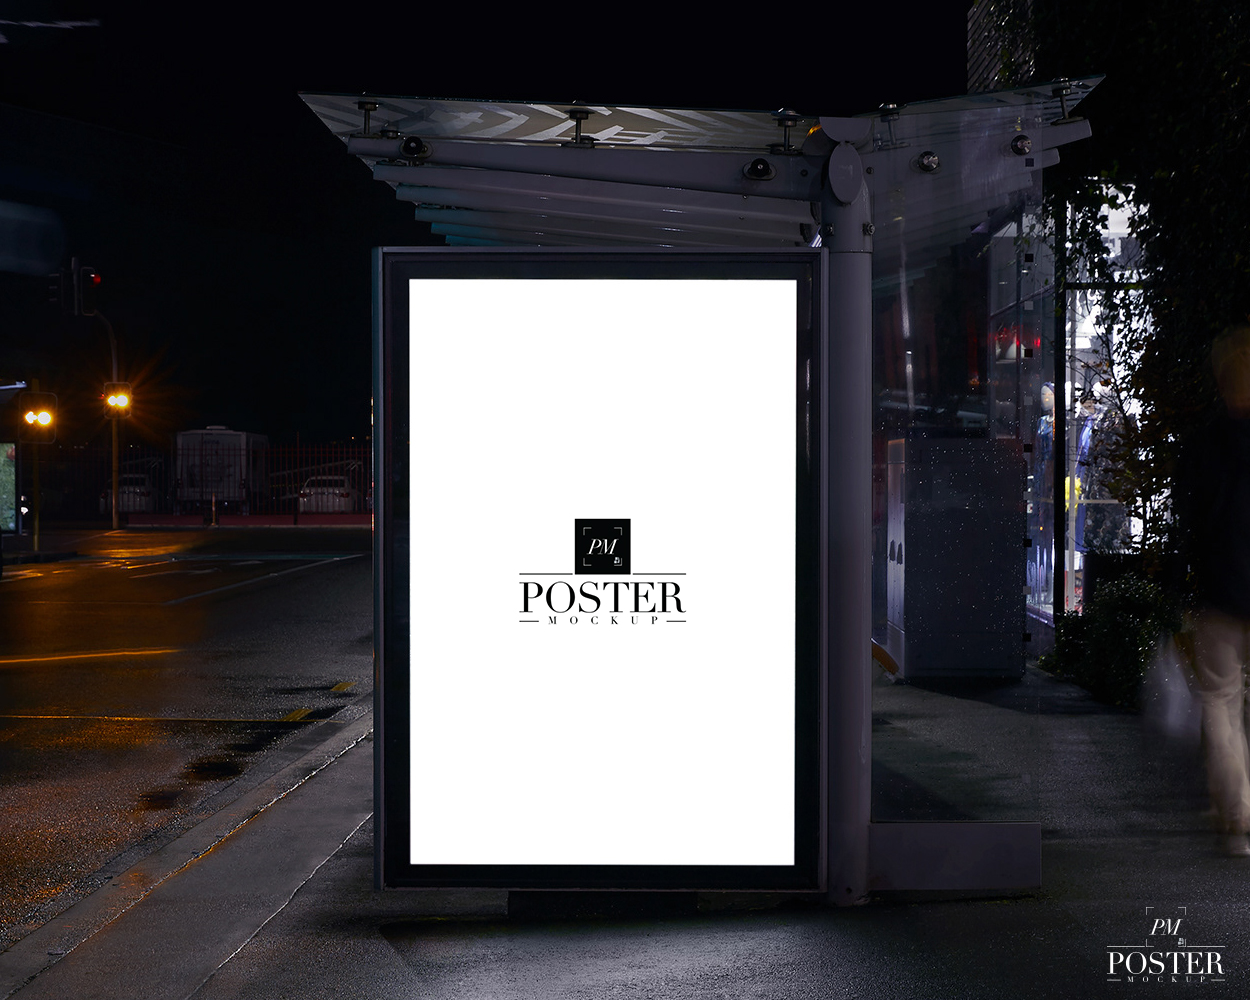 Free-Bus-Shelter-PSD-Poster-Mockup-For-Outdoor-Advertisement-600